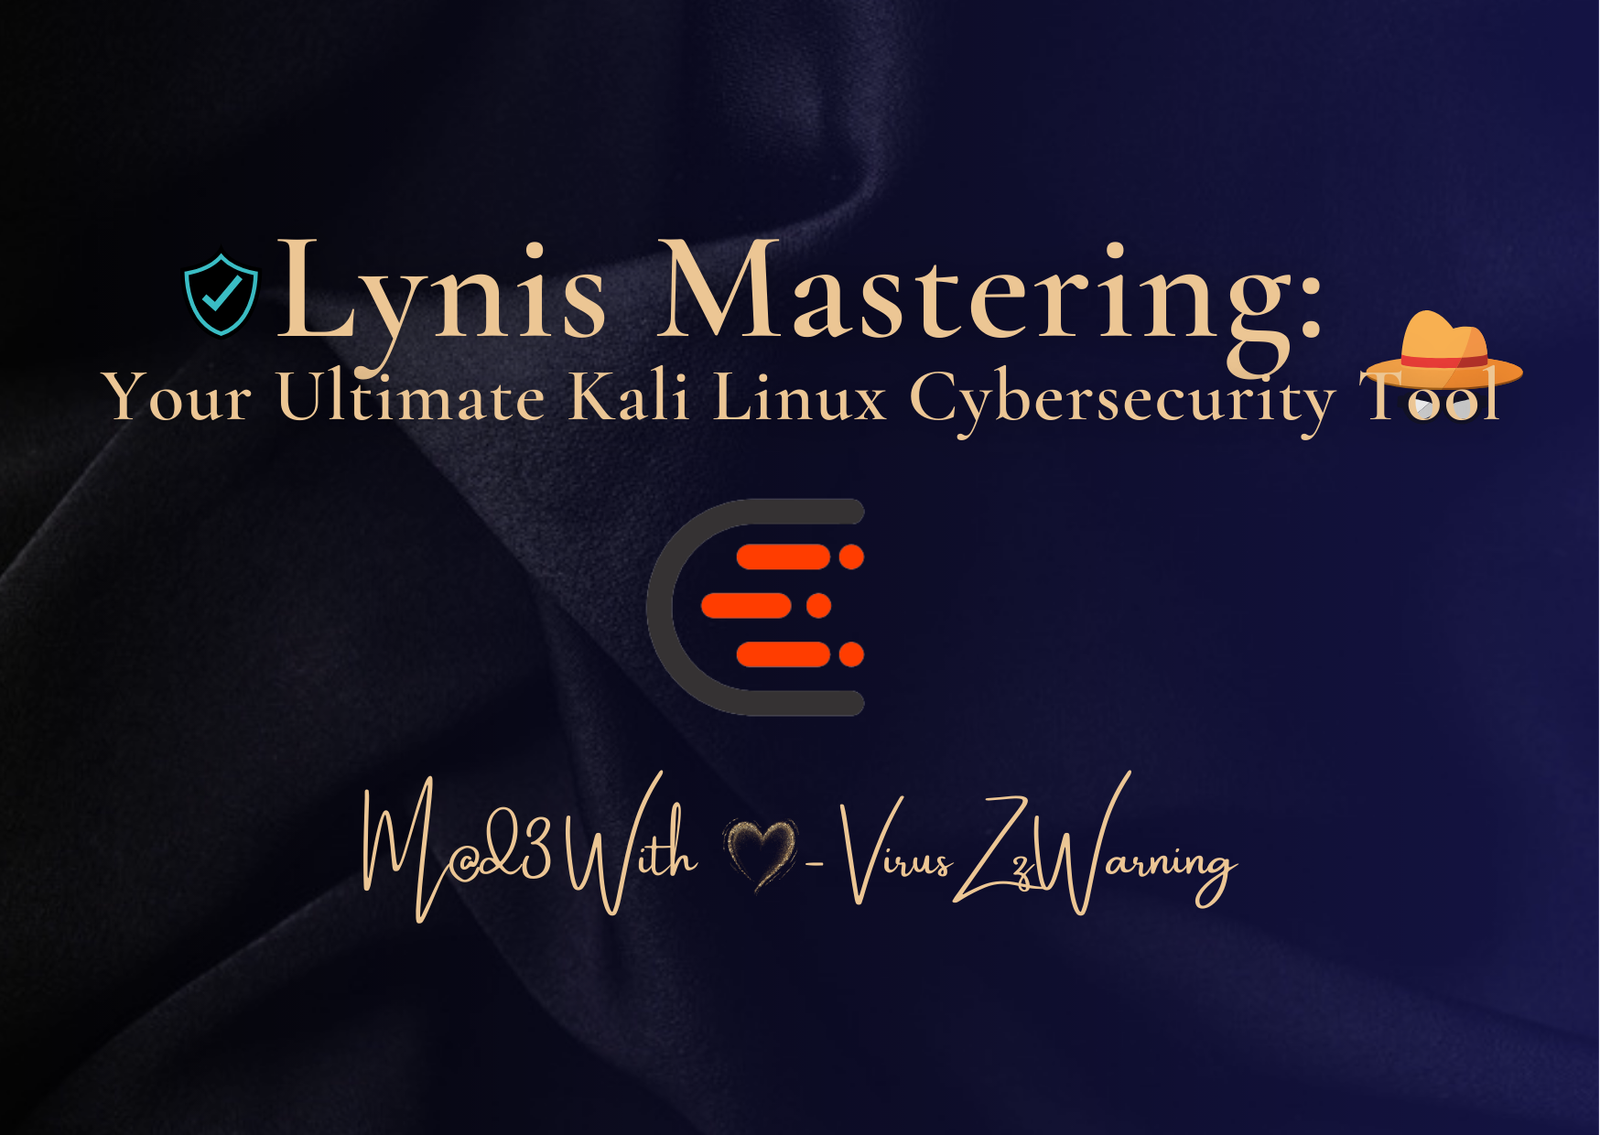 Lynis Mastering: Your Ultimate Kali Linux Cybersecurity Tool